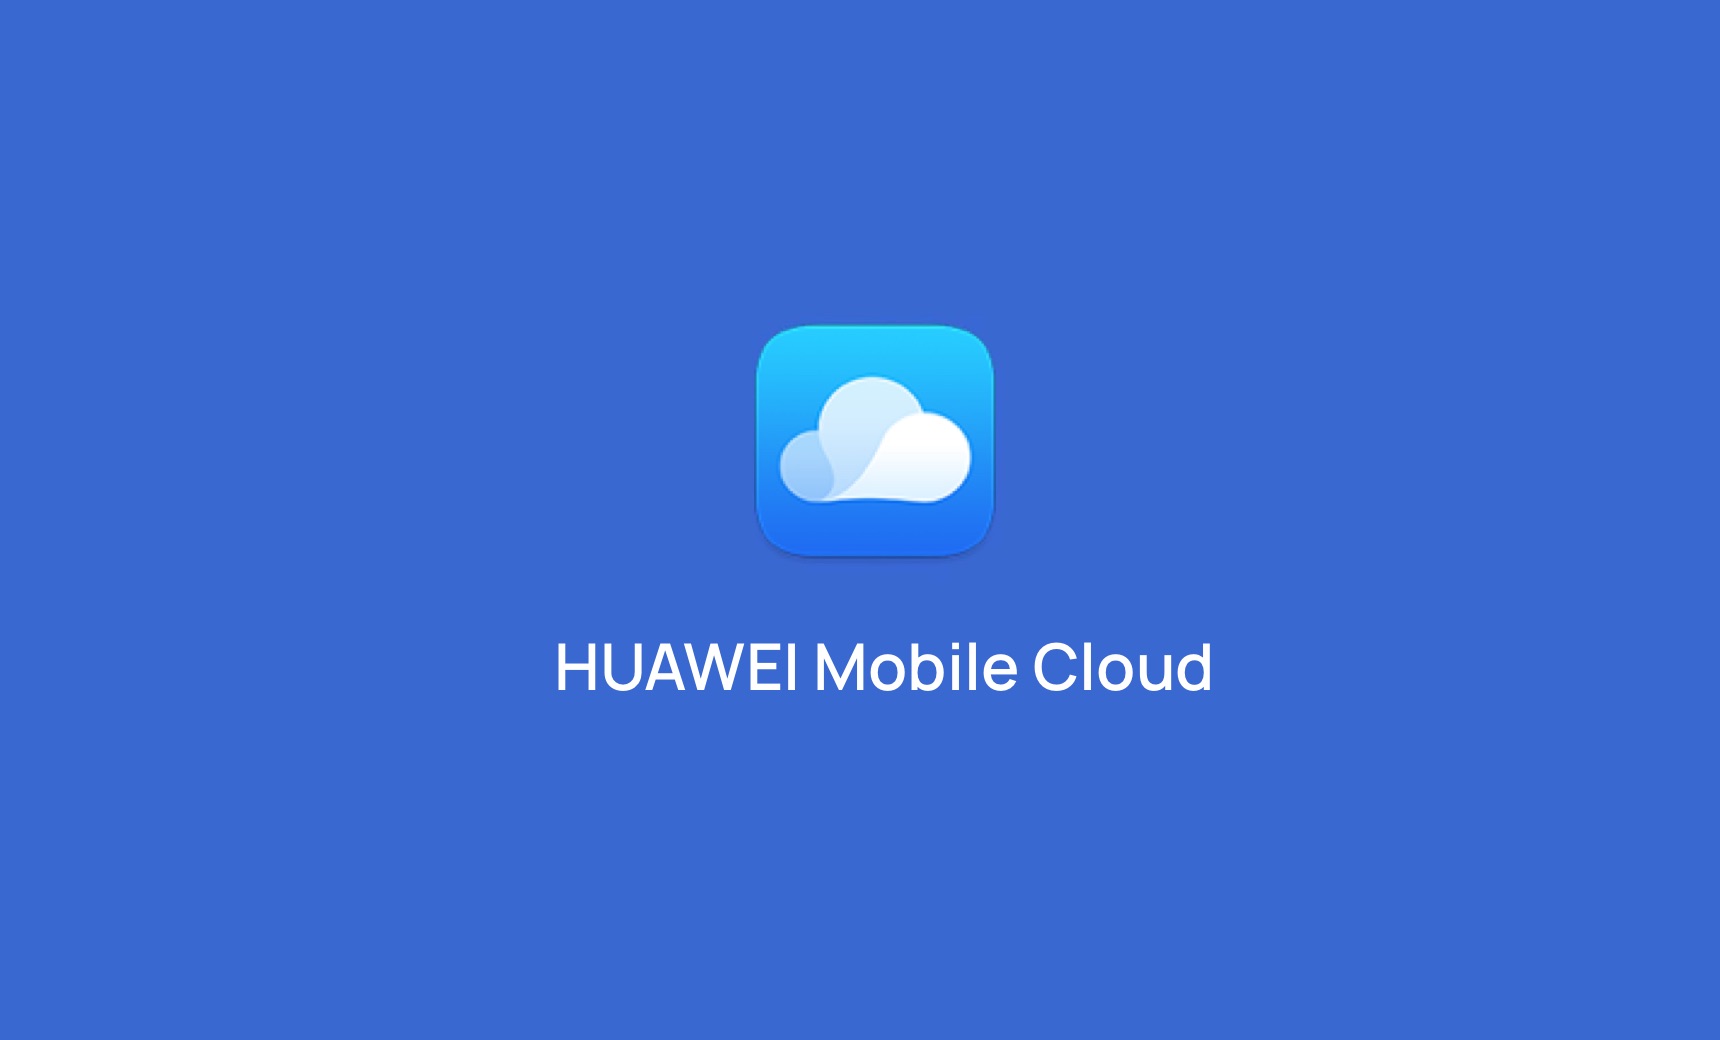 sustainability - Privacy - Huawei mobile cloud service - HiCloud 